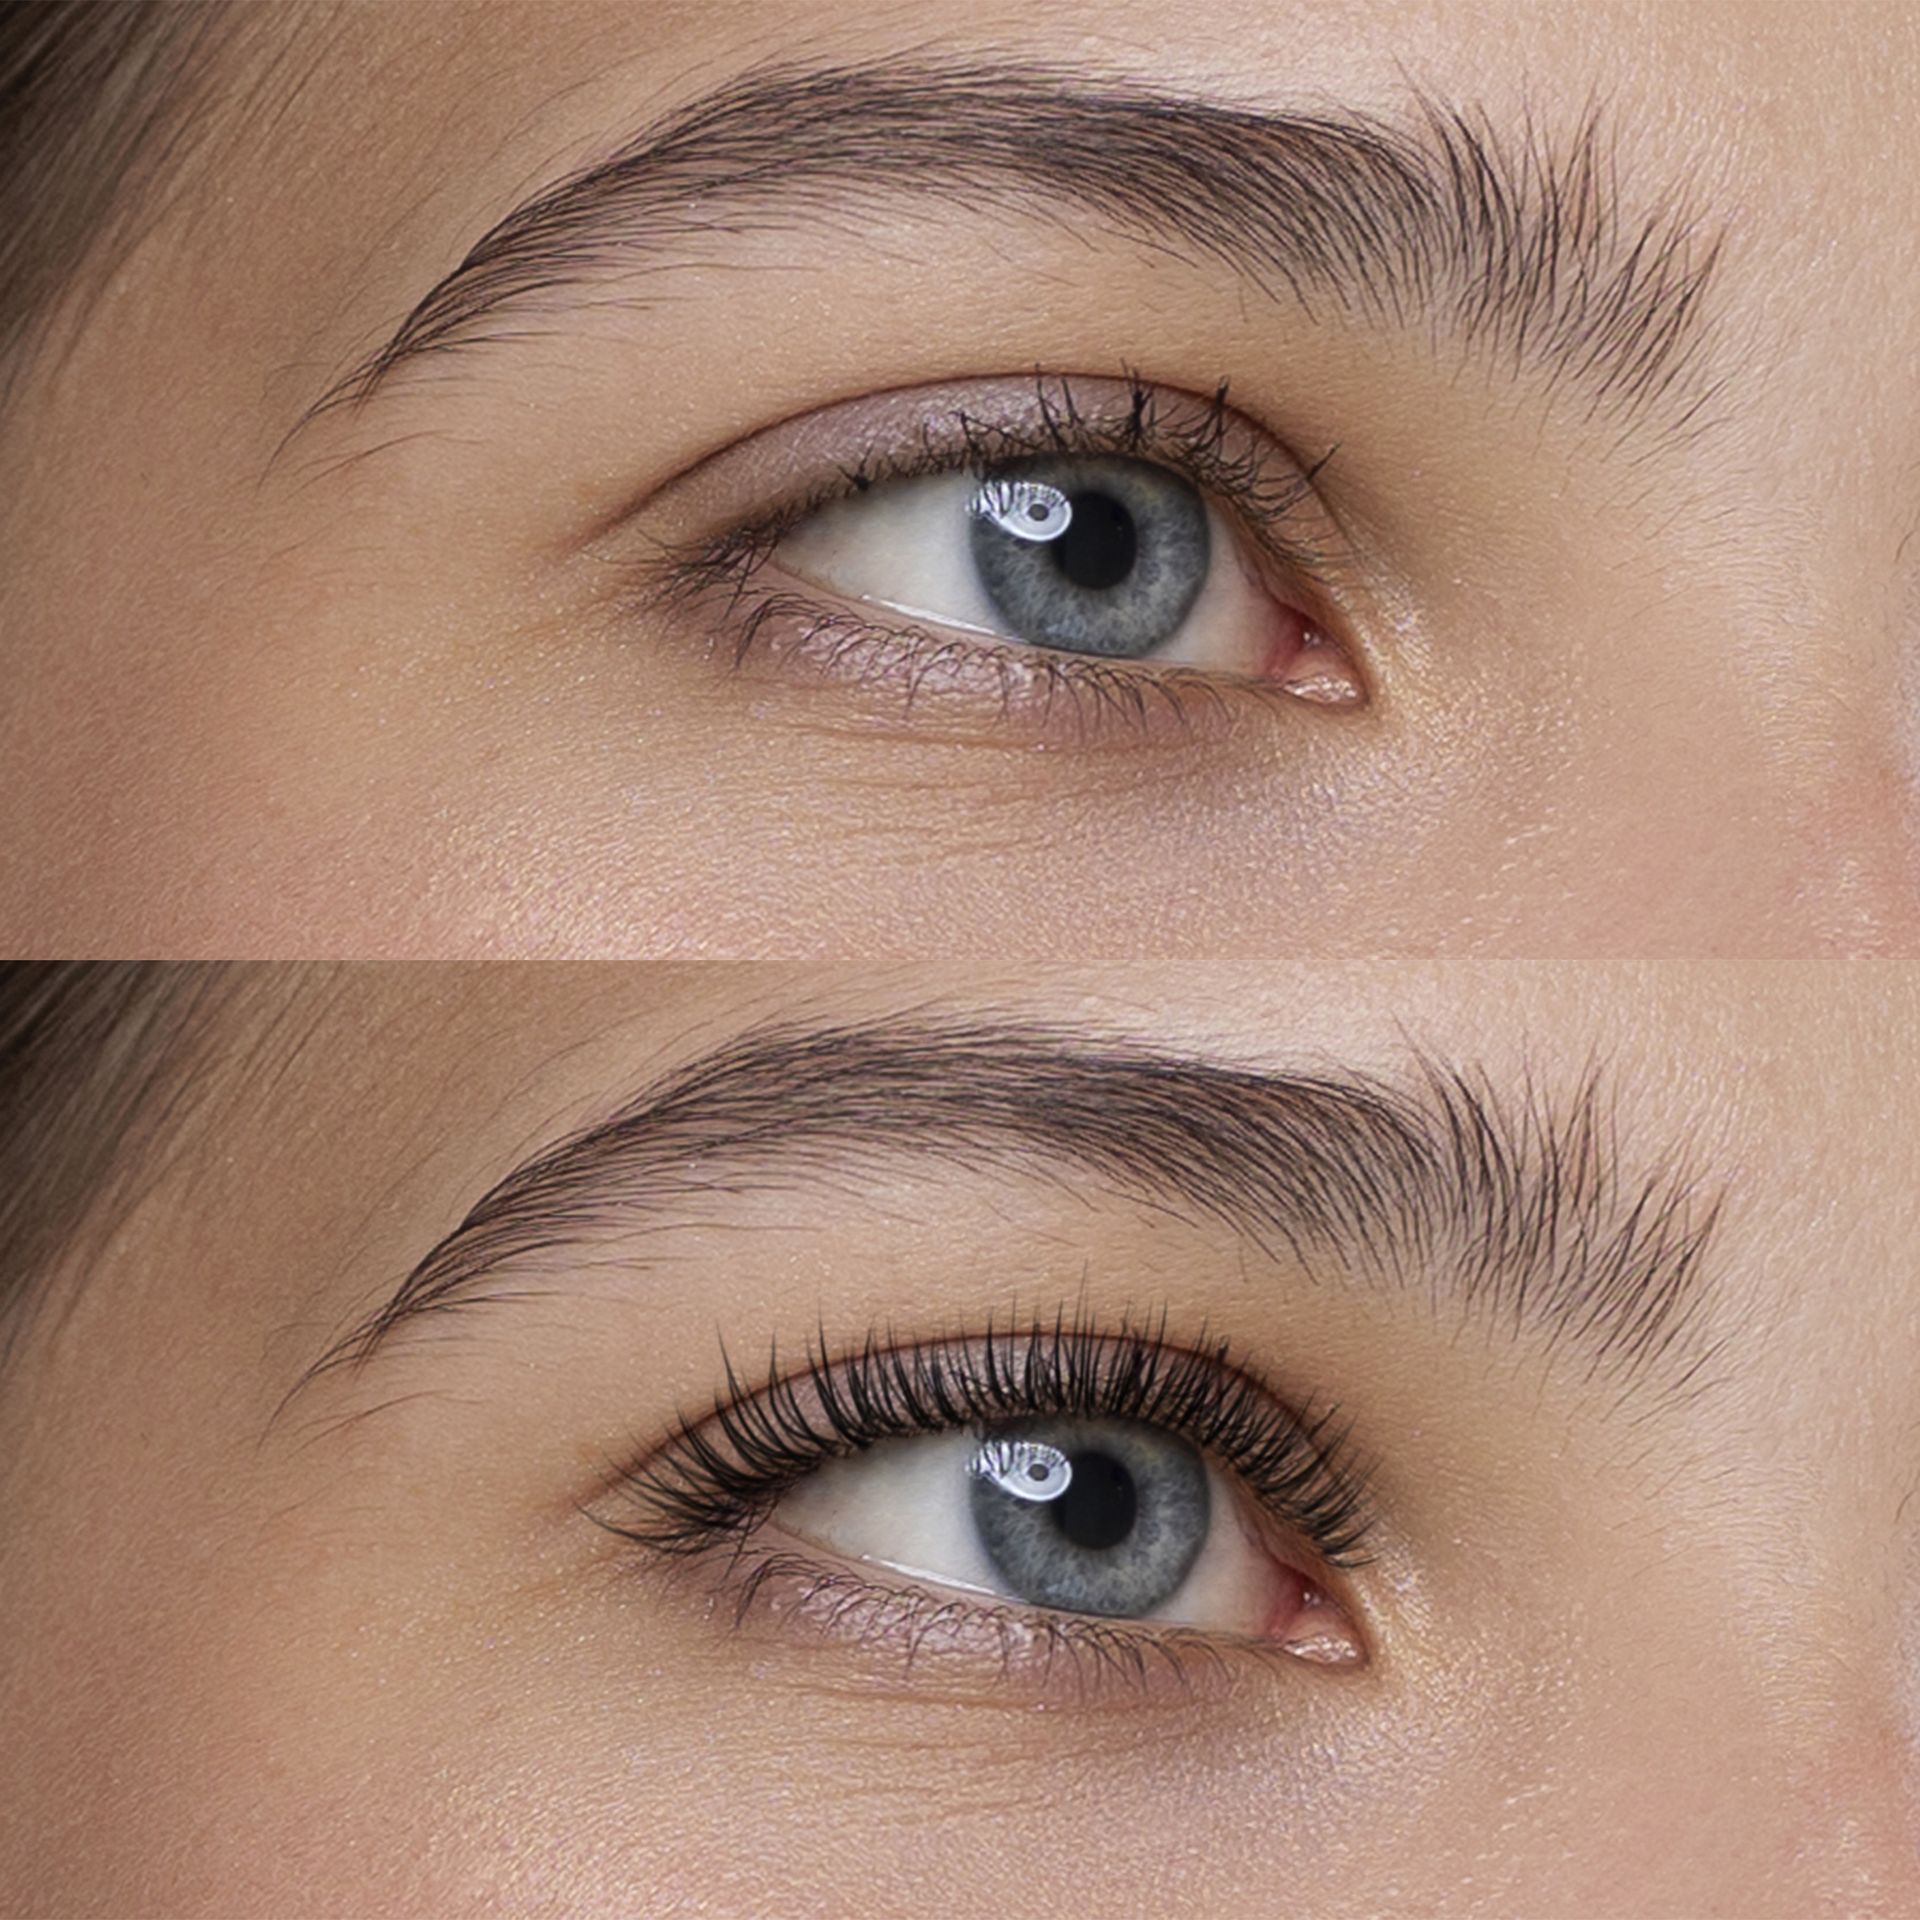 A before and after picture of a woman 's eye with and without mascara